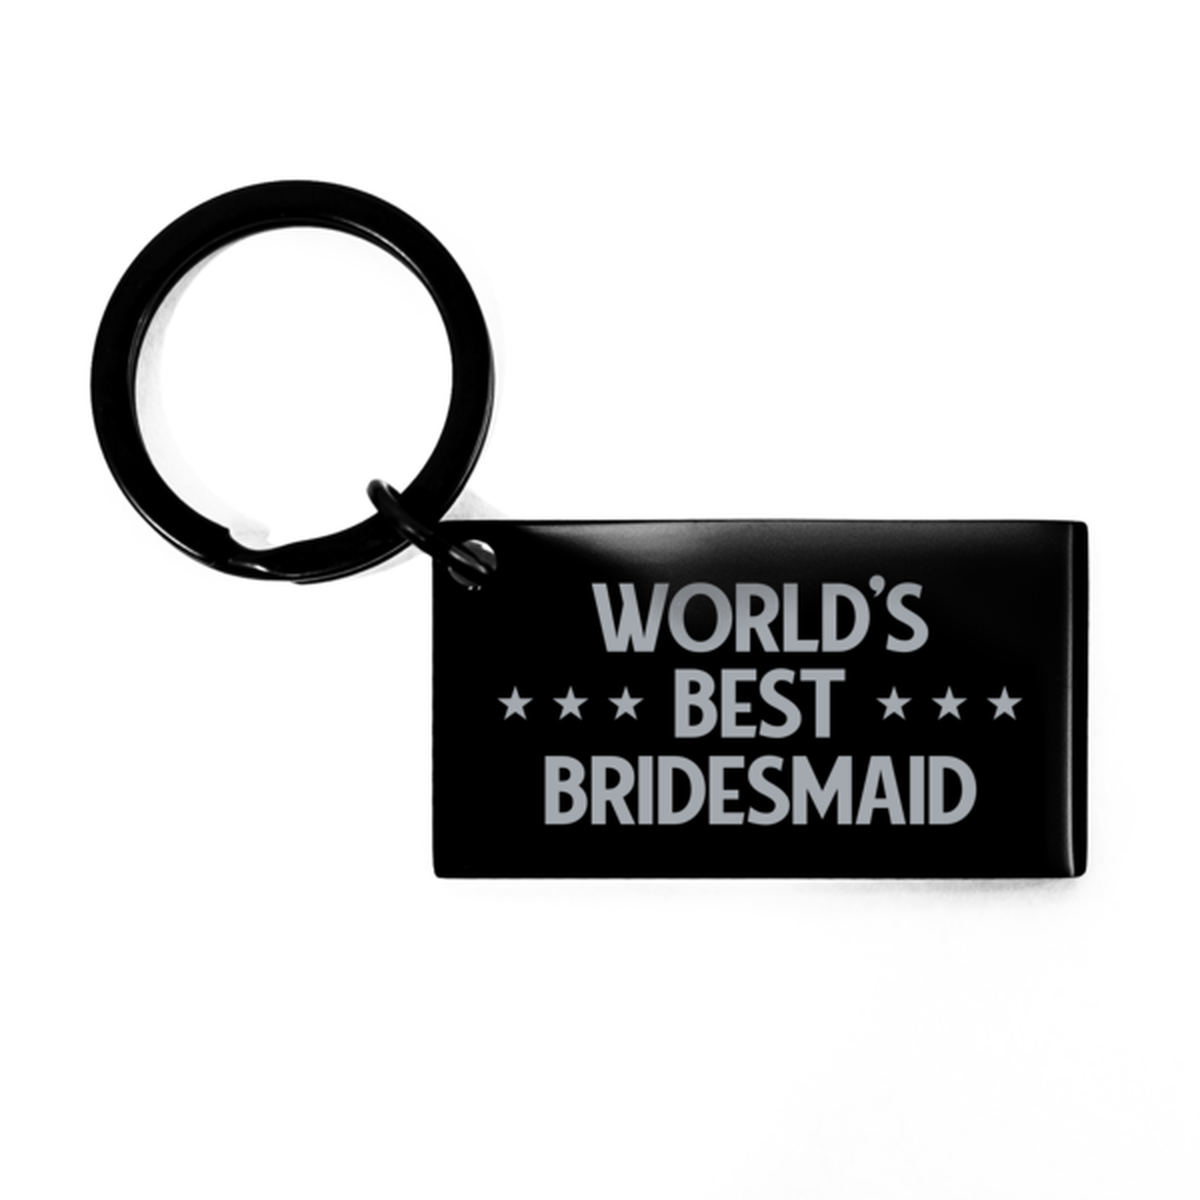 Worlds Best Bridemaid Gifts, Funny Black Engraved Keychain For Bridemaid, Birthday Presents For Women